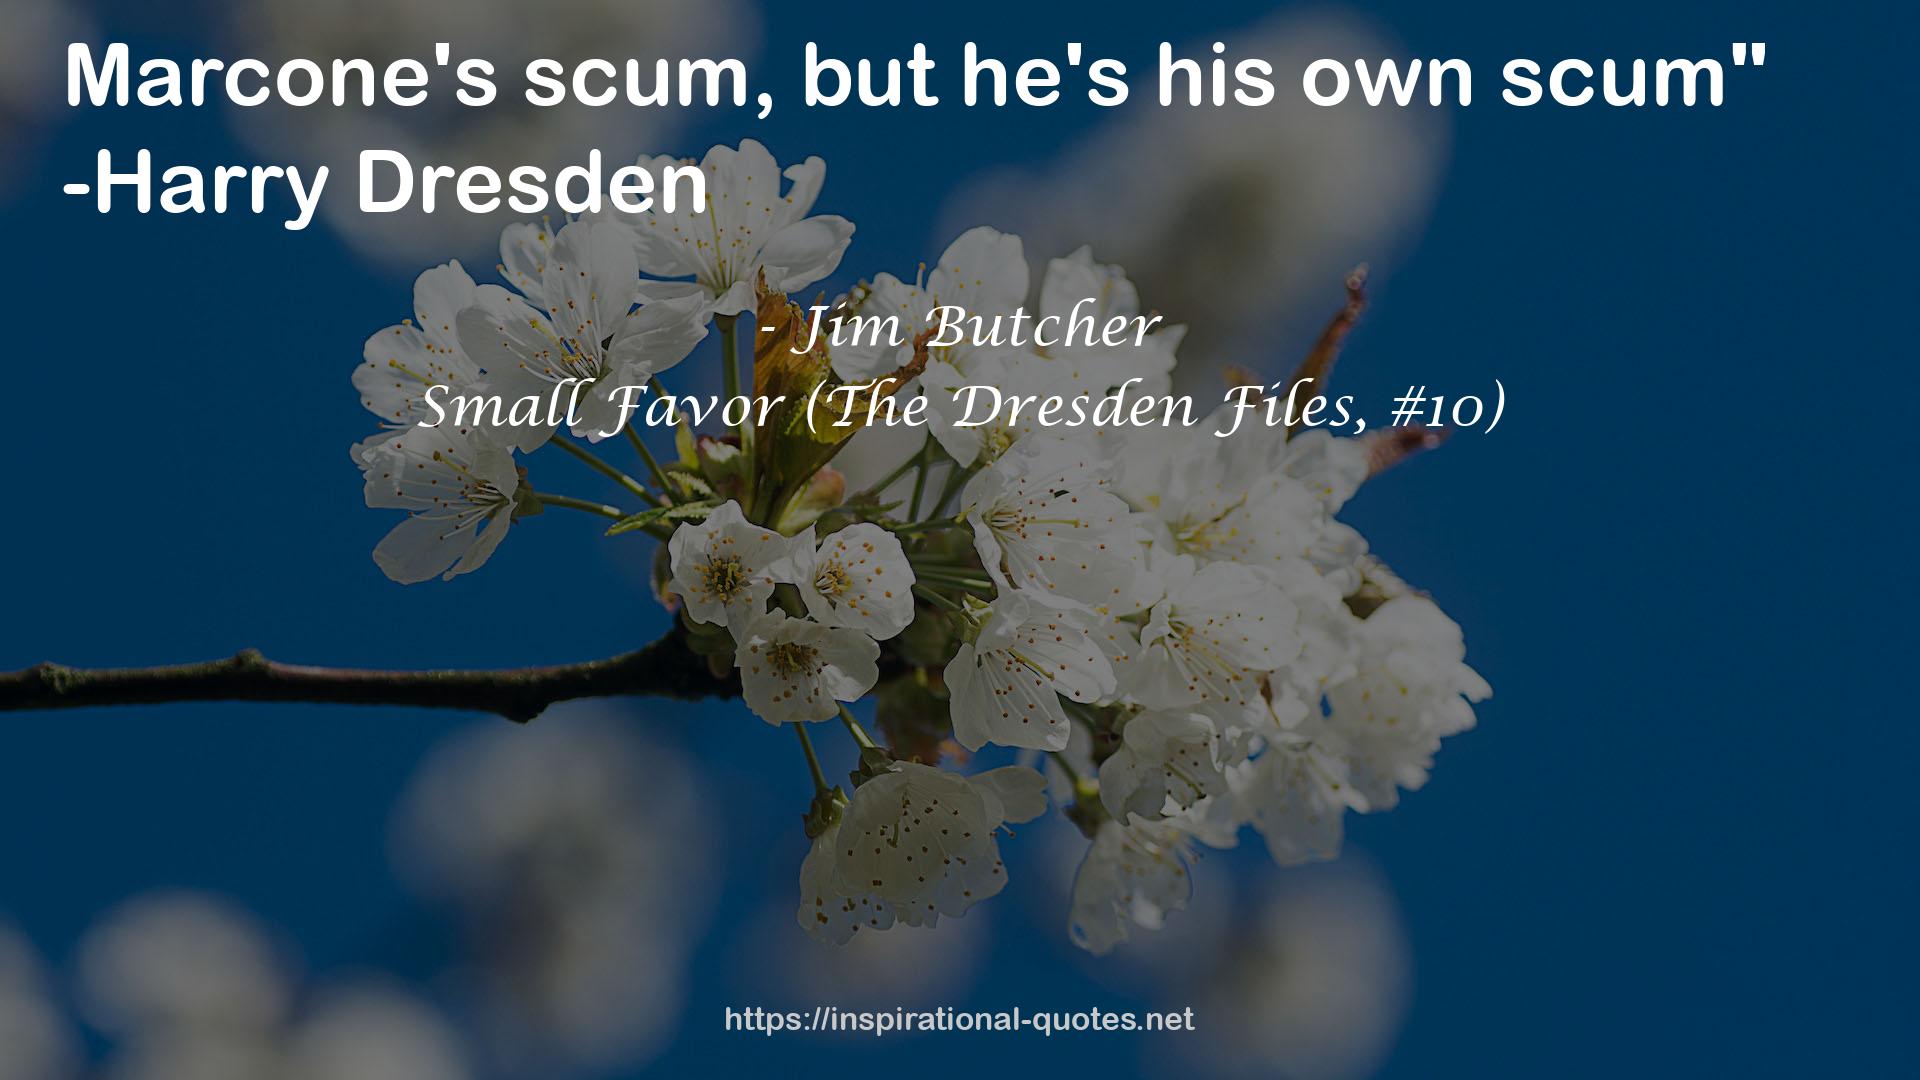 Small Favor (The Dresden Files, #10) QUOTES